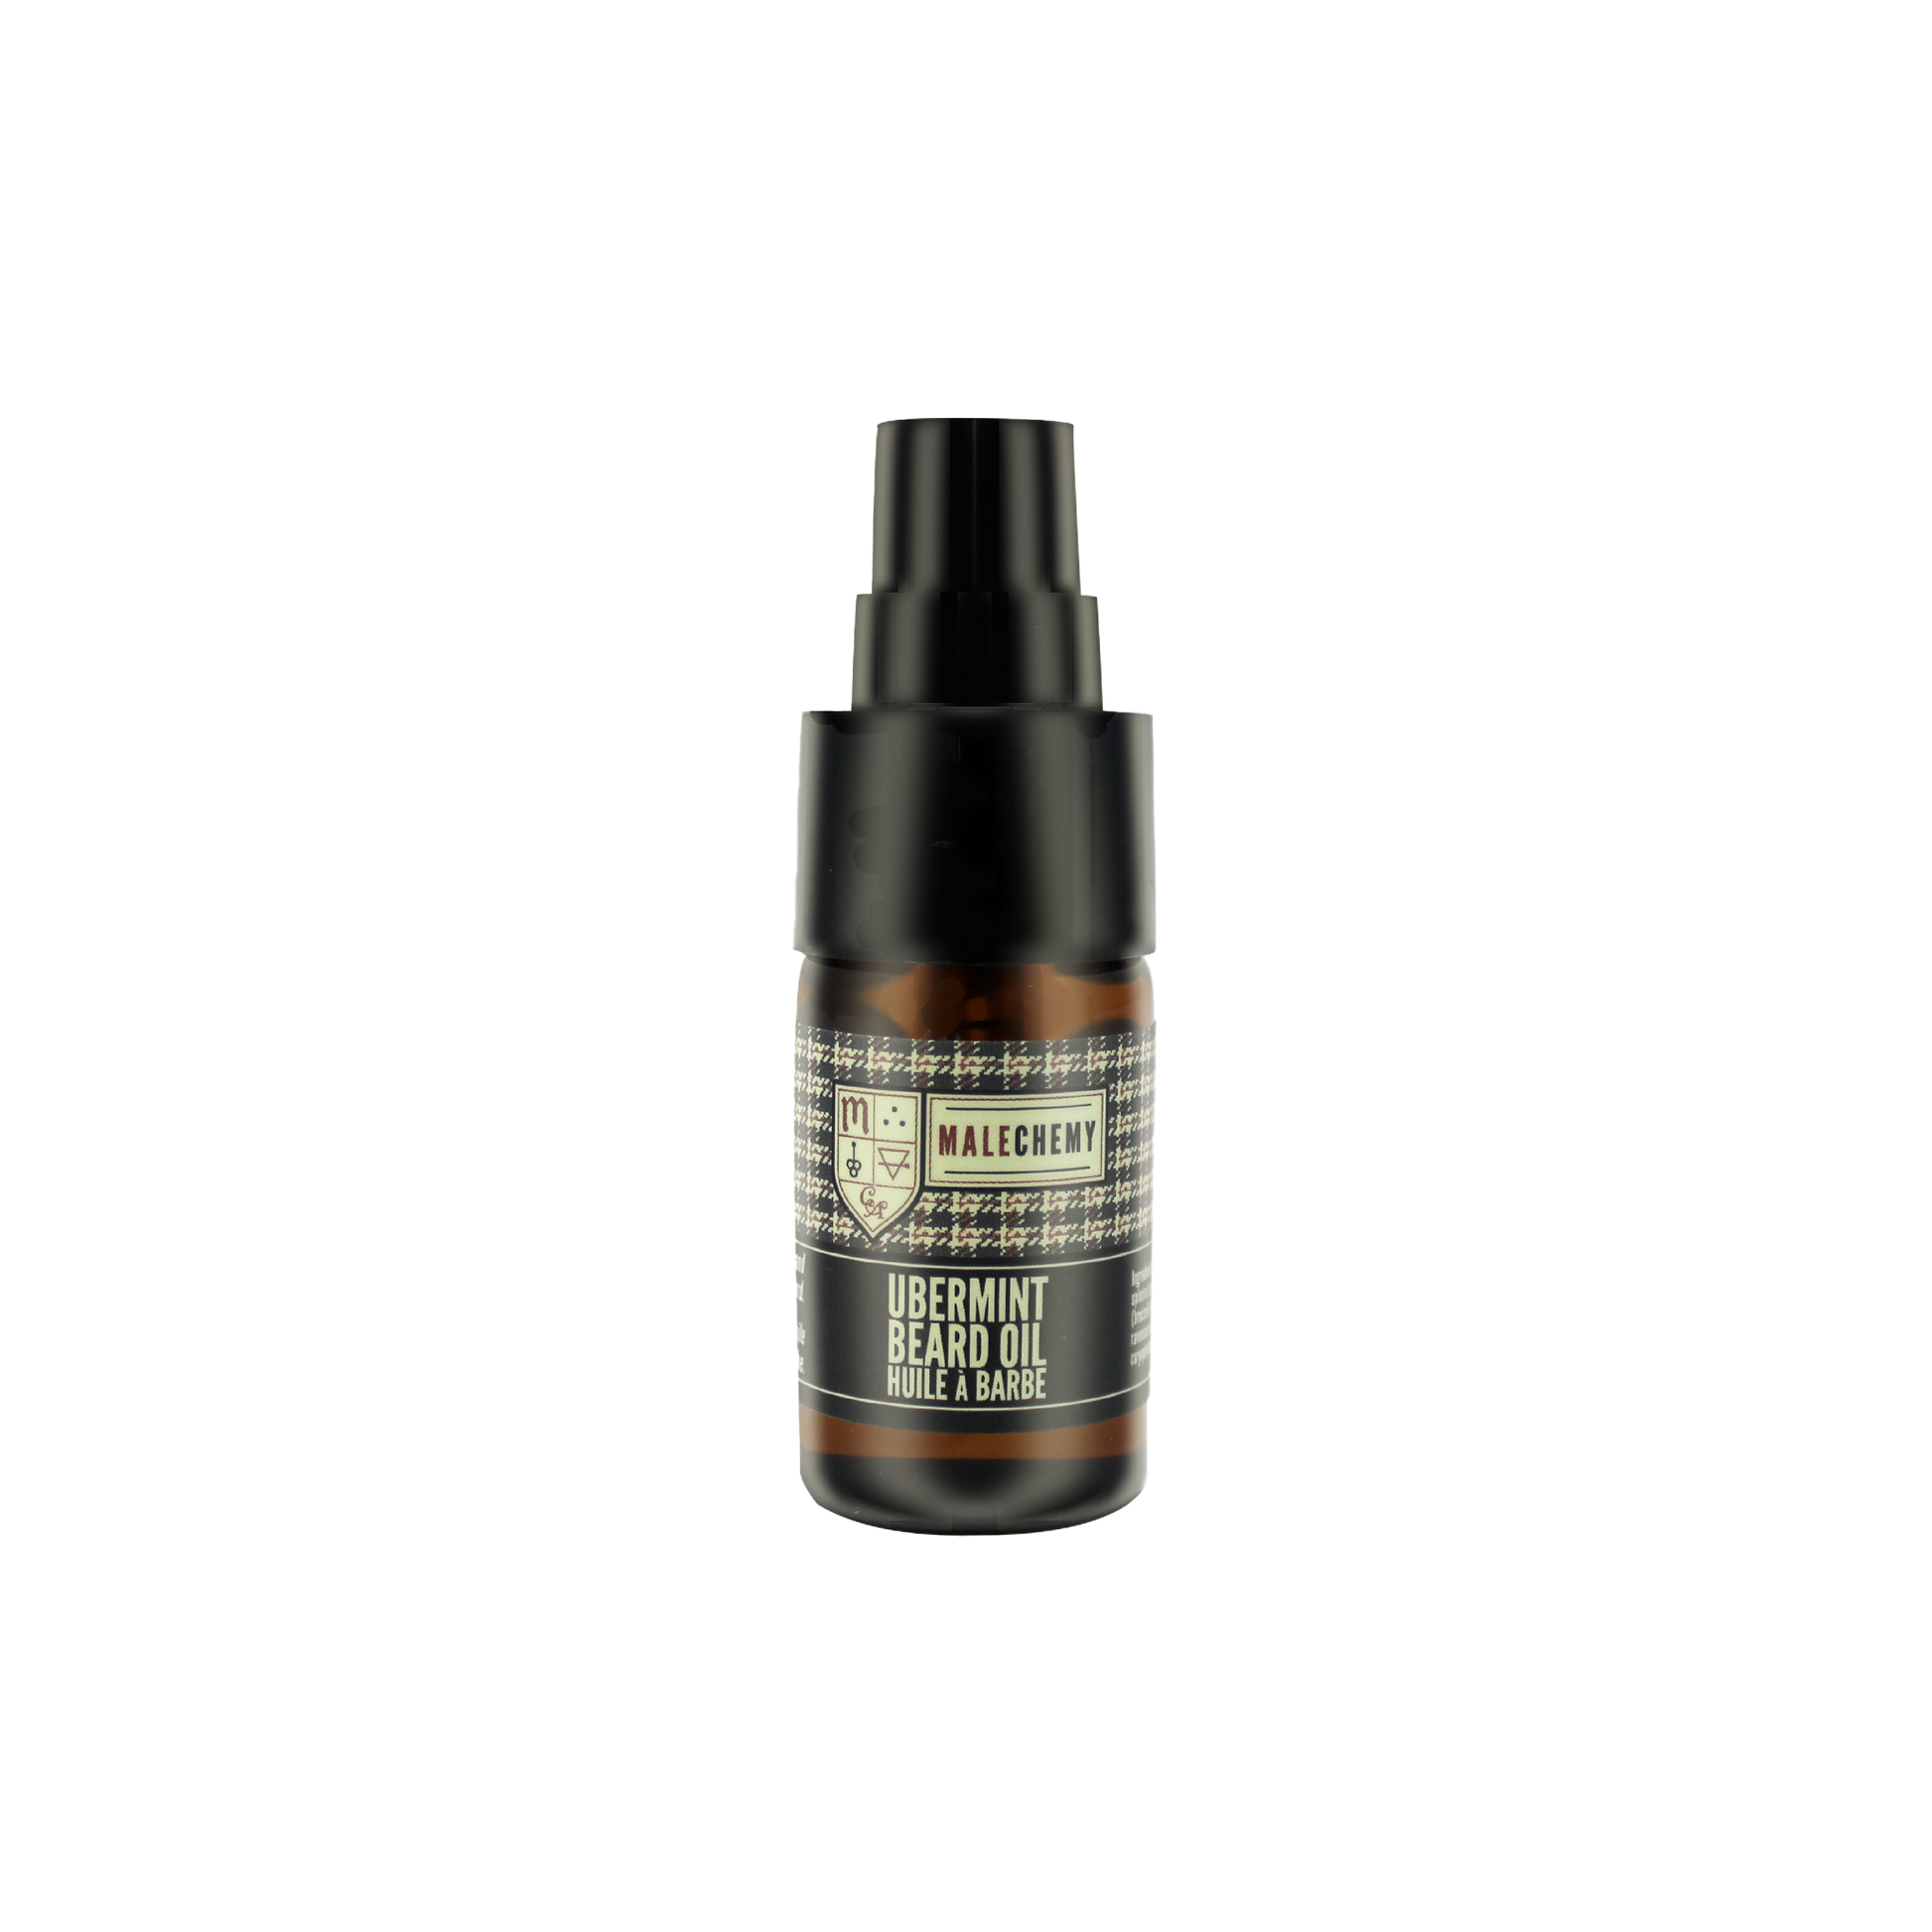 conditioning beard oil that has fresh minty scent